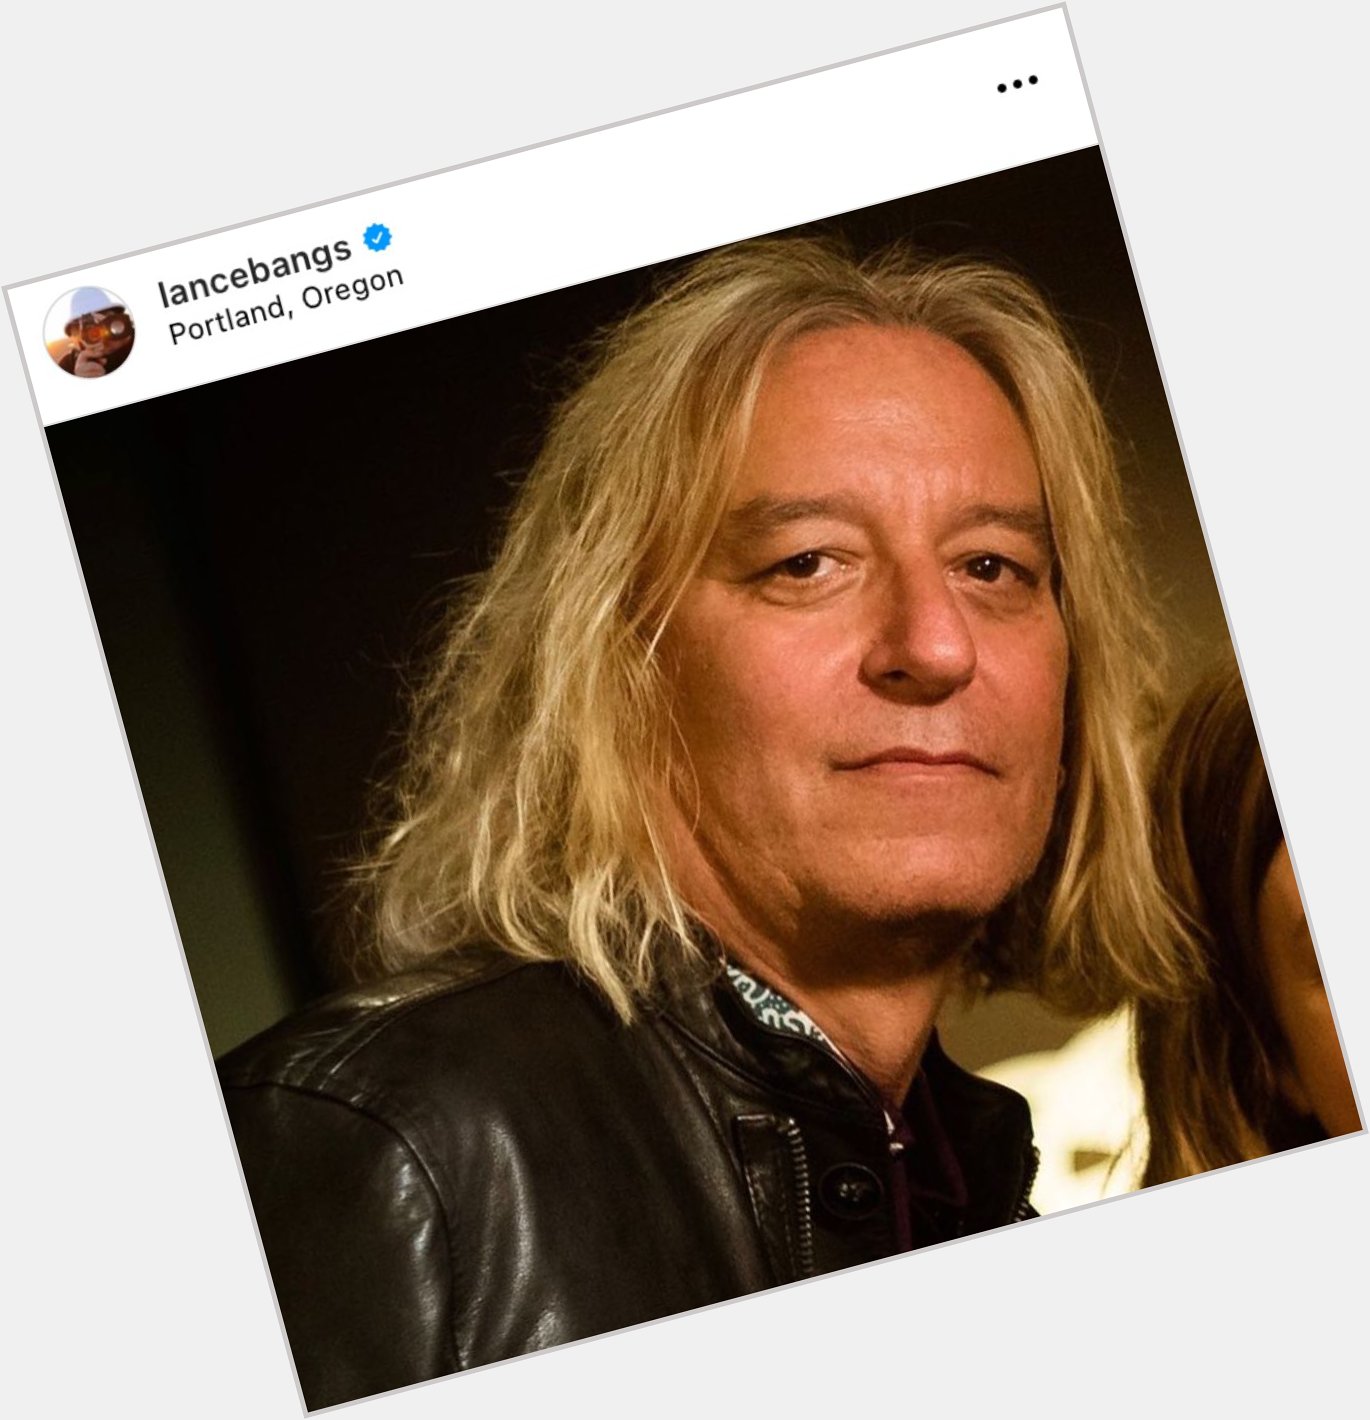 Johnny knoxville wishing peter buck a happy birthday in lance bangs instagram comments 